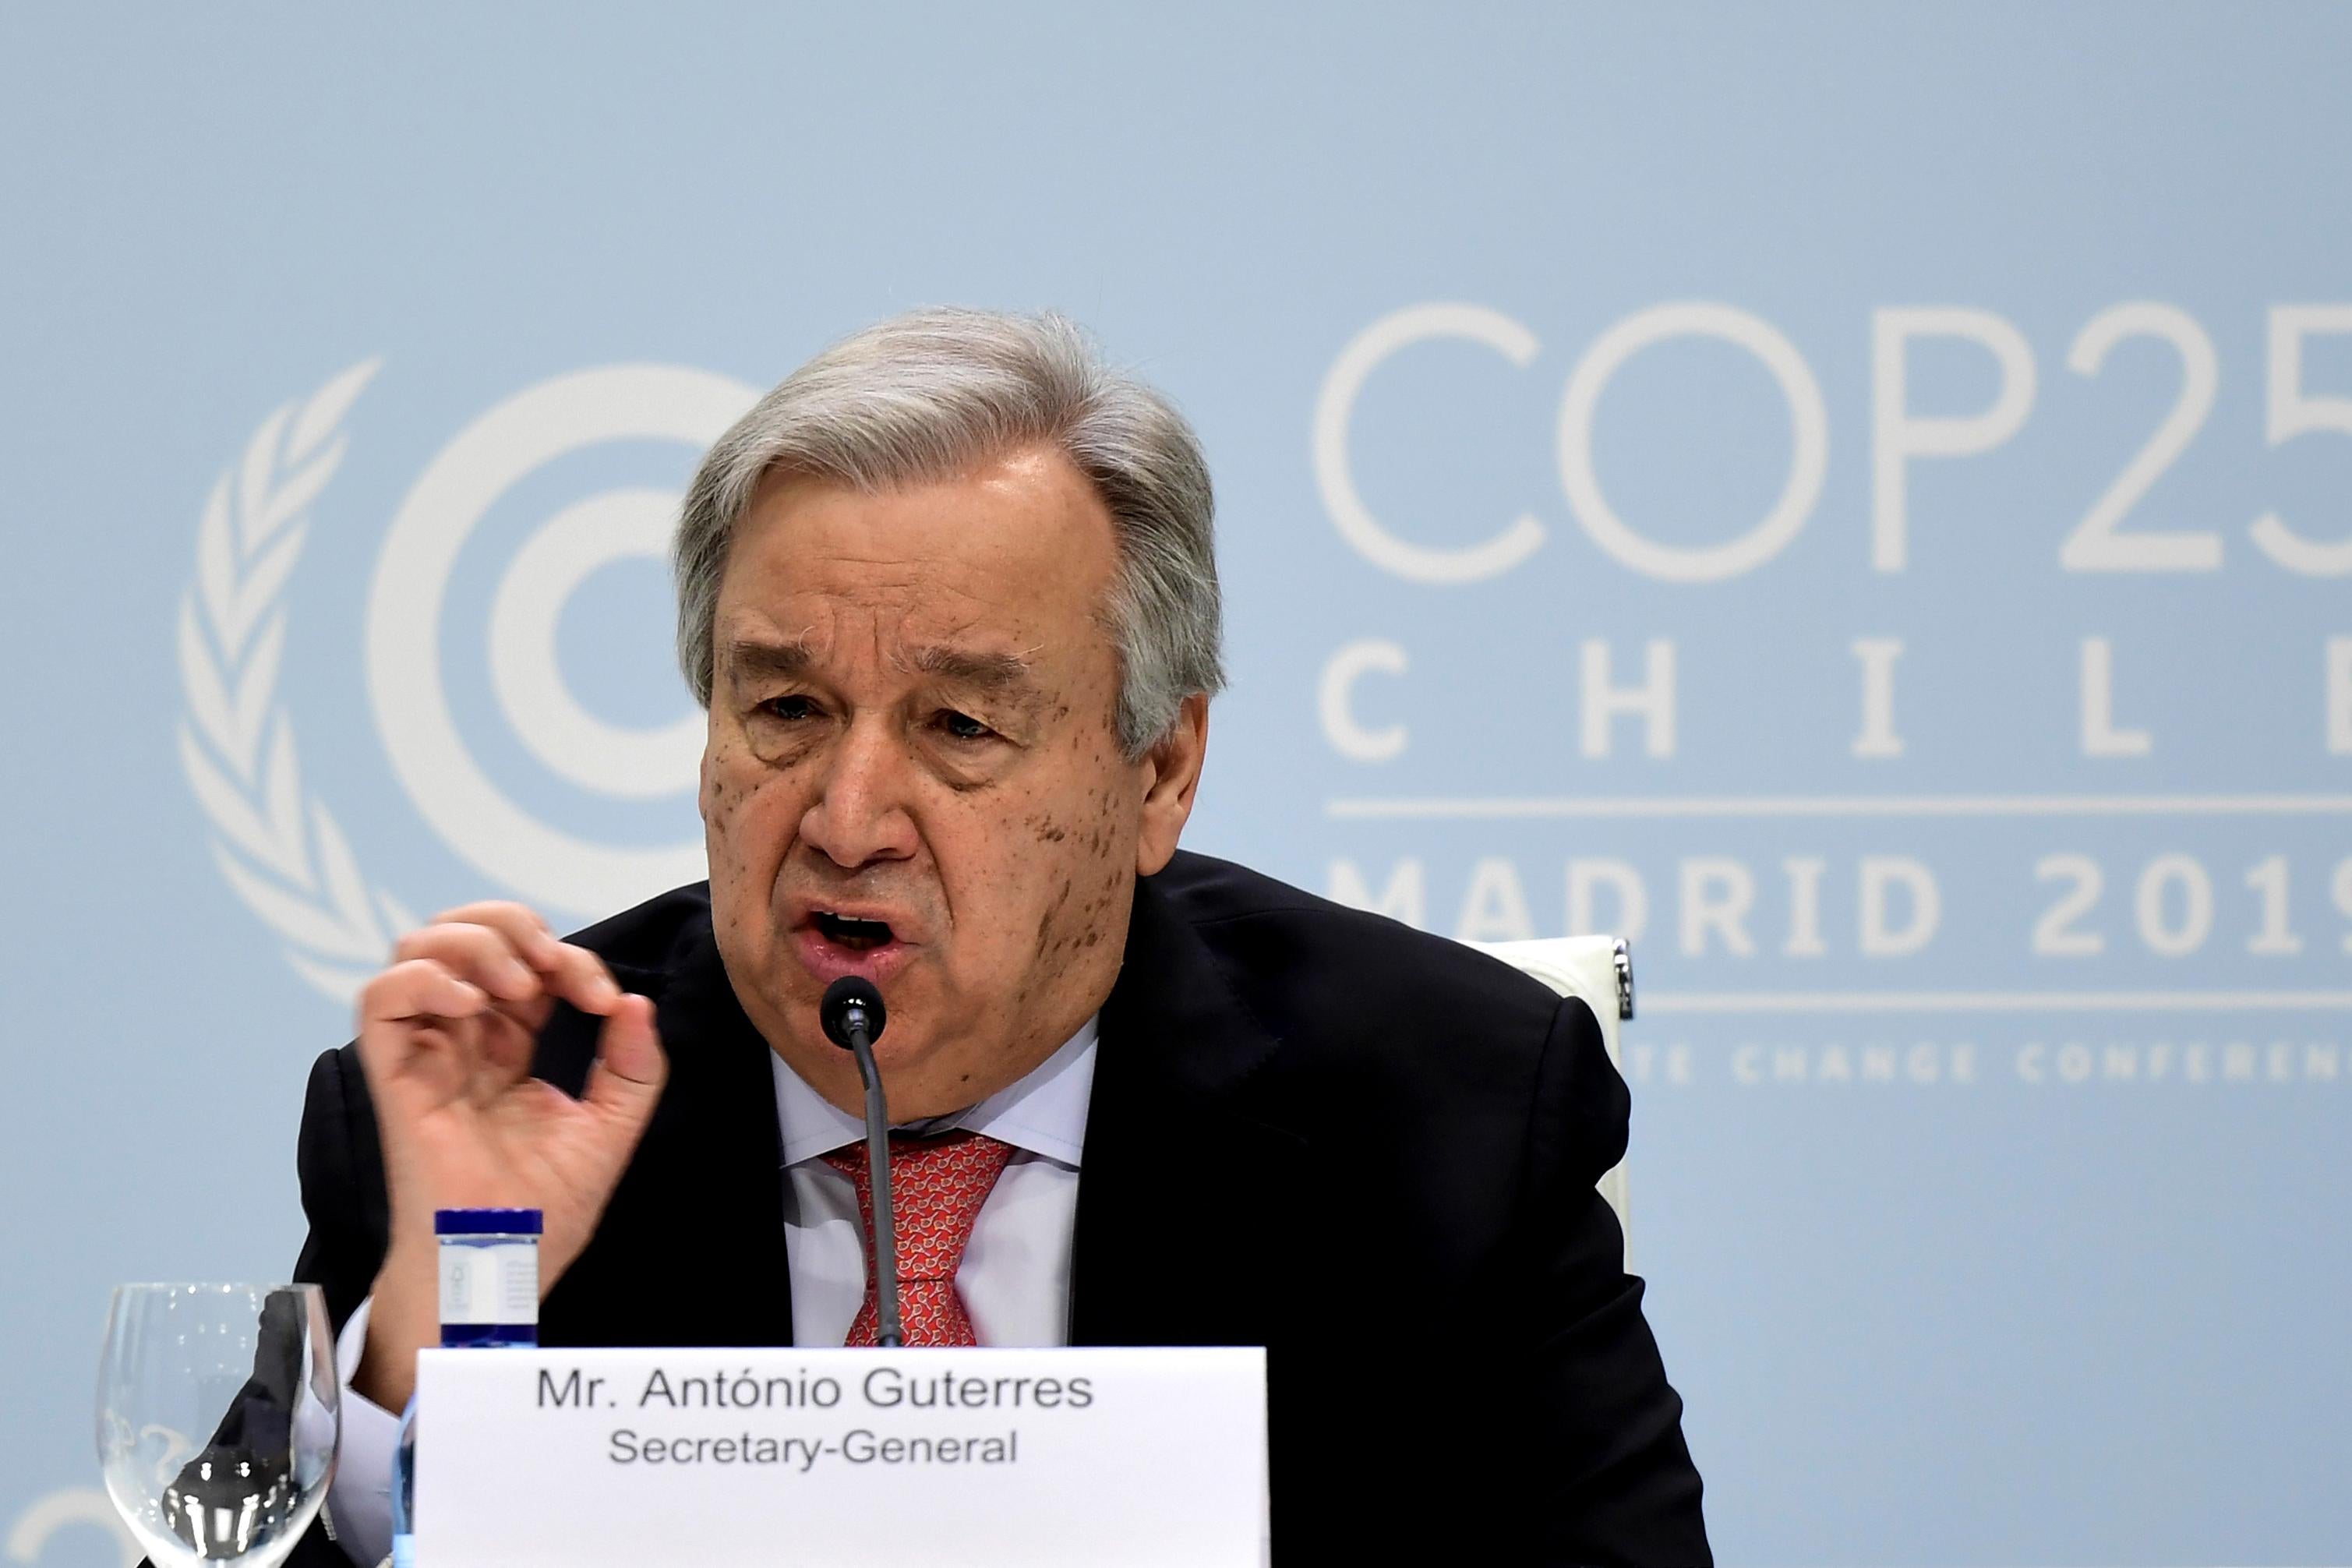 United Nations Secretary-General Antonio Guterres gives a press conference in Madrid, on December 1, 2019.